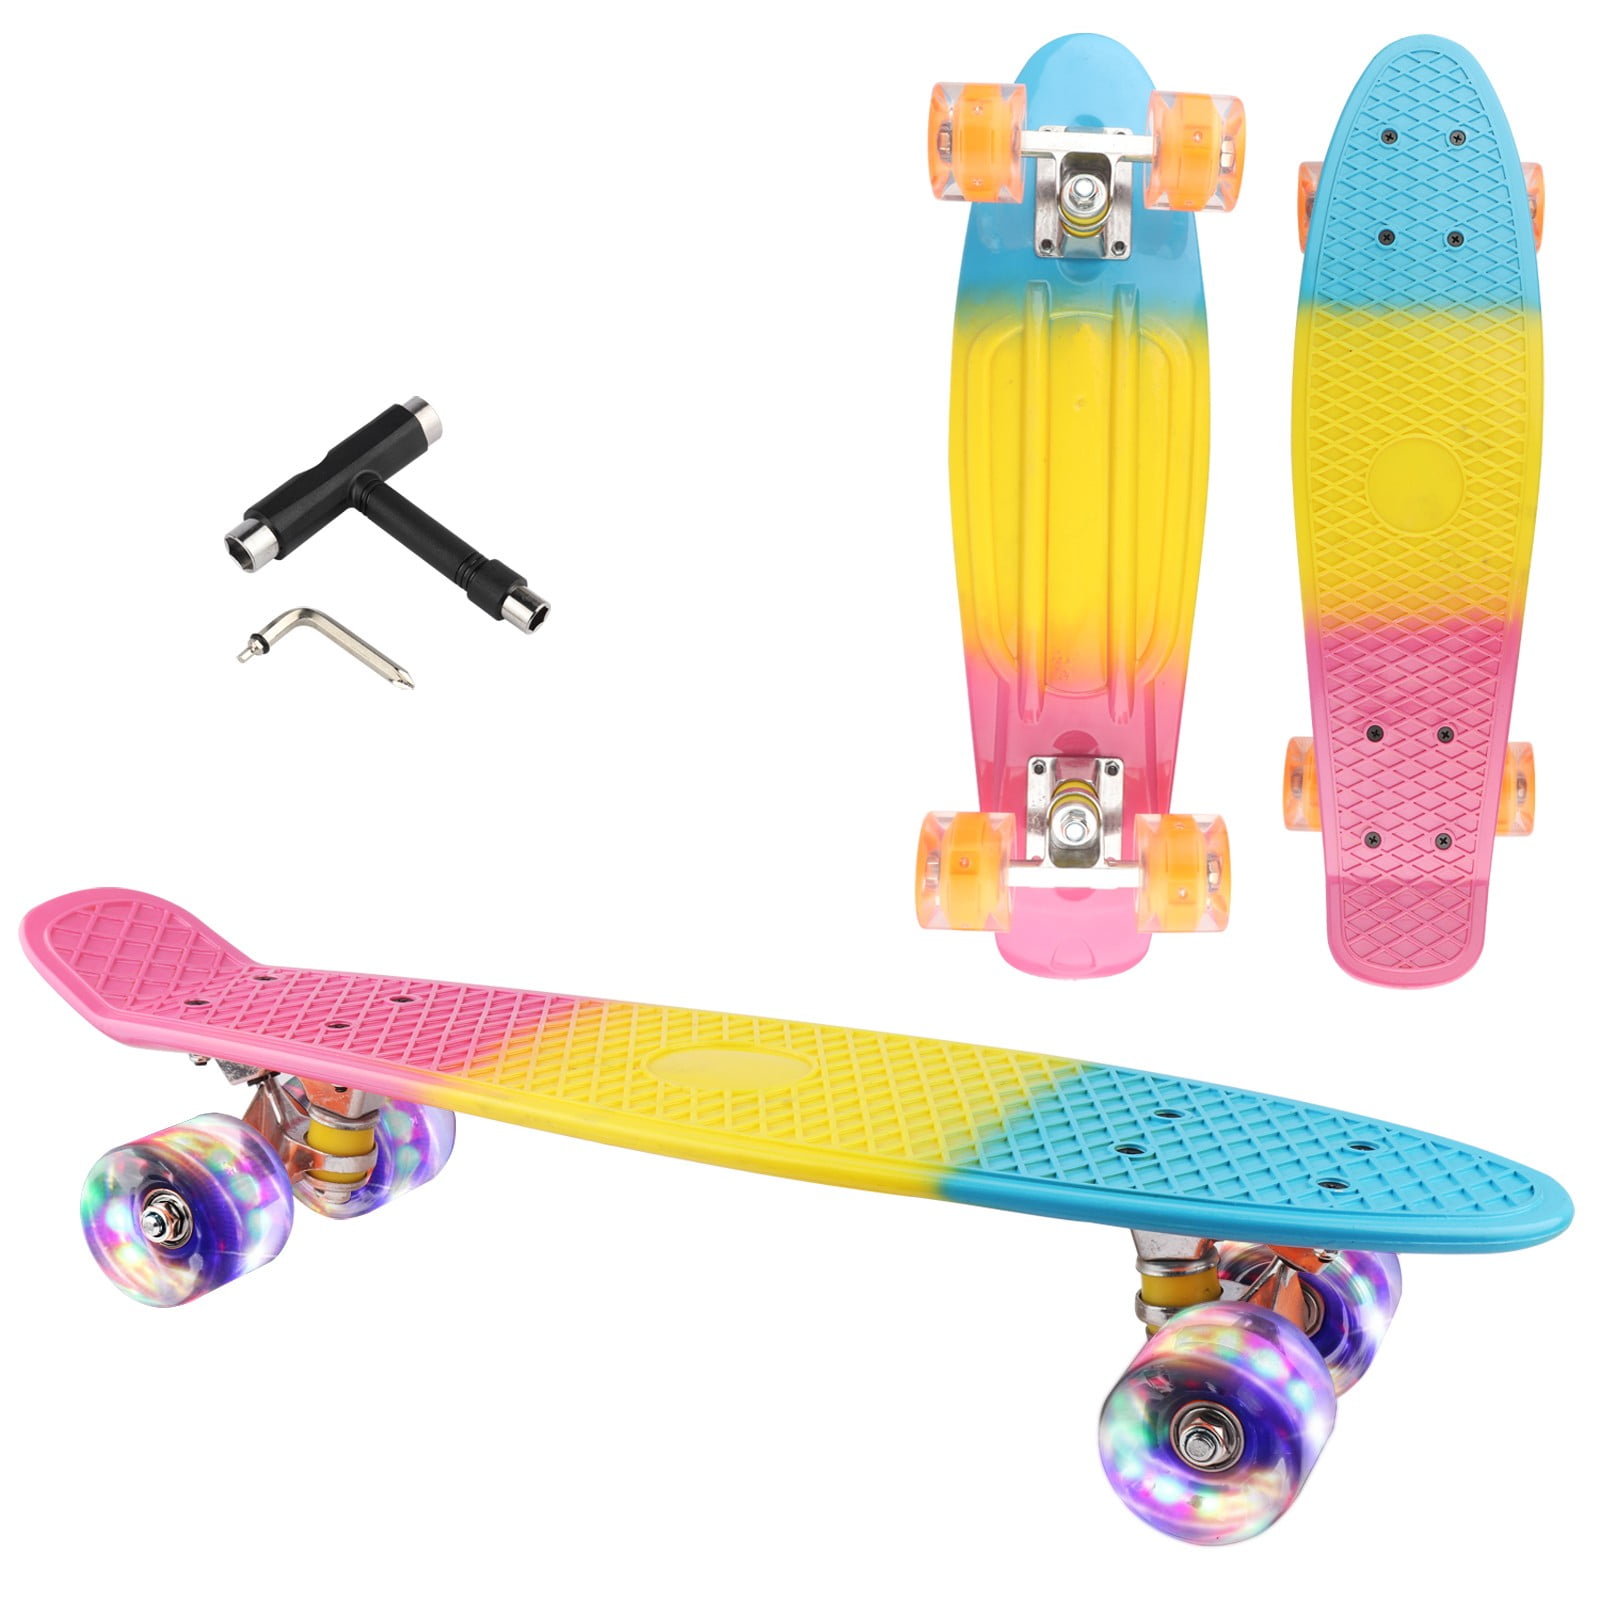 Skateboard Cruiser Complete 27 inch Skateboards with LED Light Up Wheels with All-in-one T-Tool for Beginners 